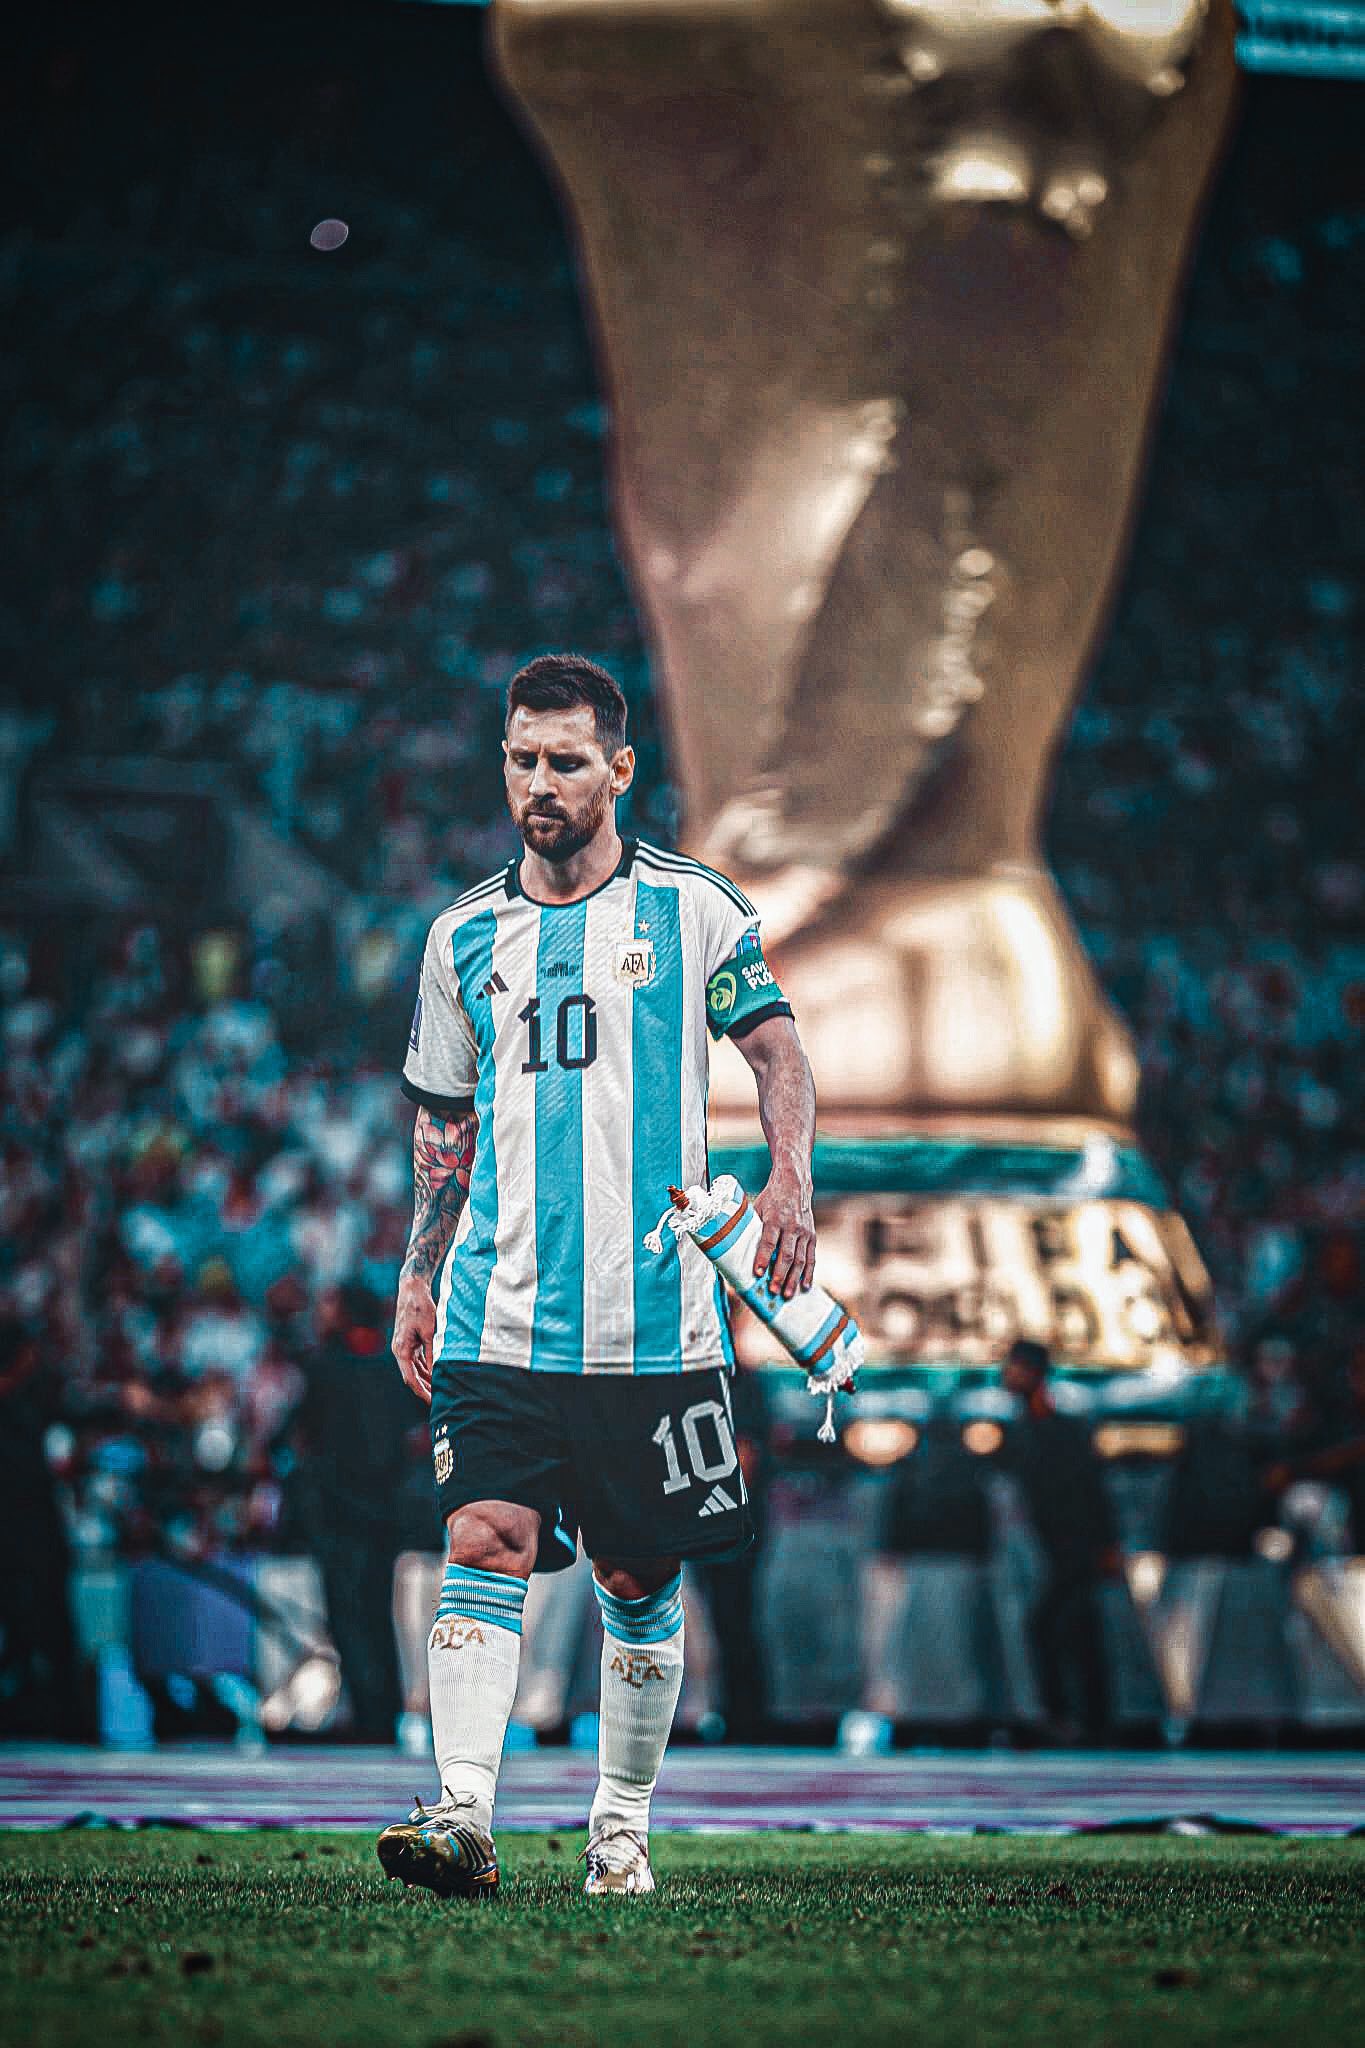 MC is Sunday, December 18th in Qatar. Today is the biggest match in the history of football. Today is Messi's second and final chance at doing the impossible